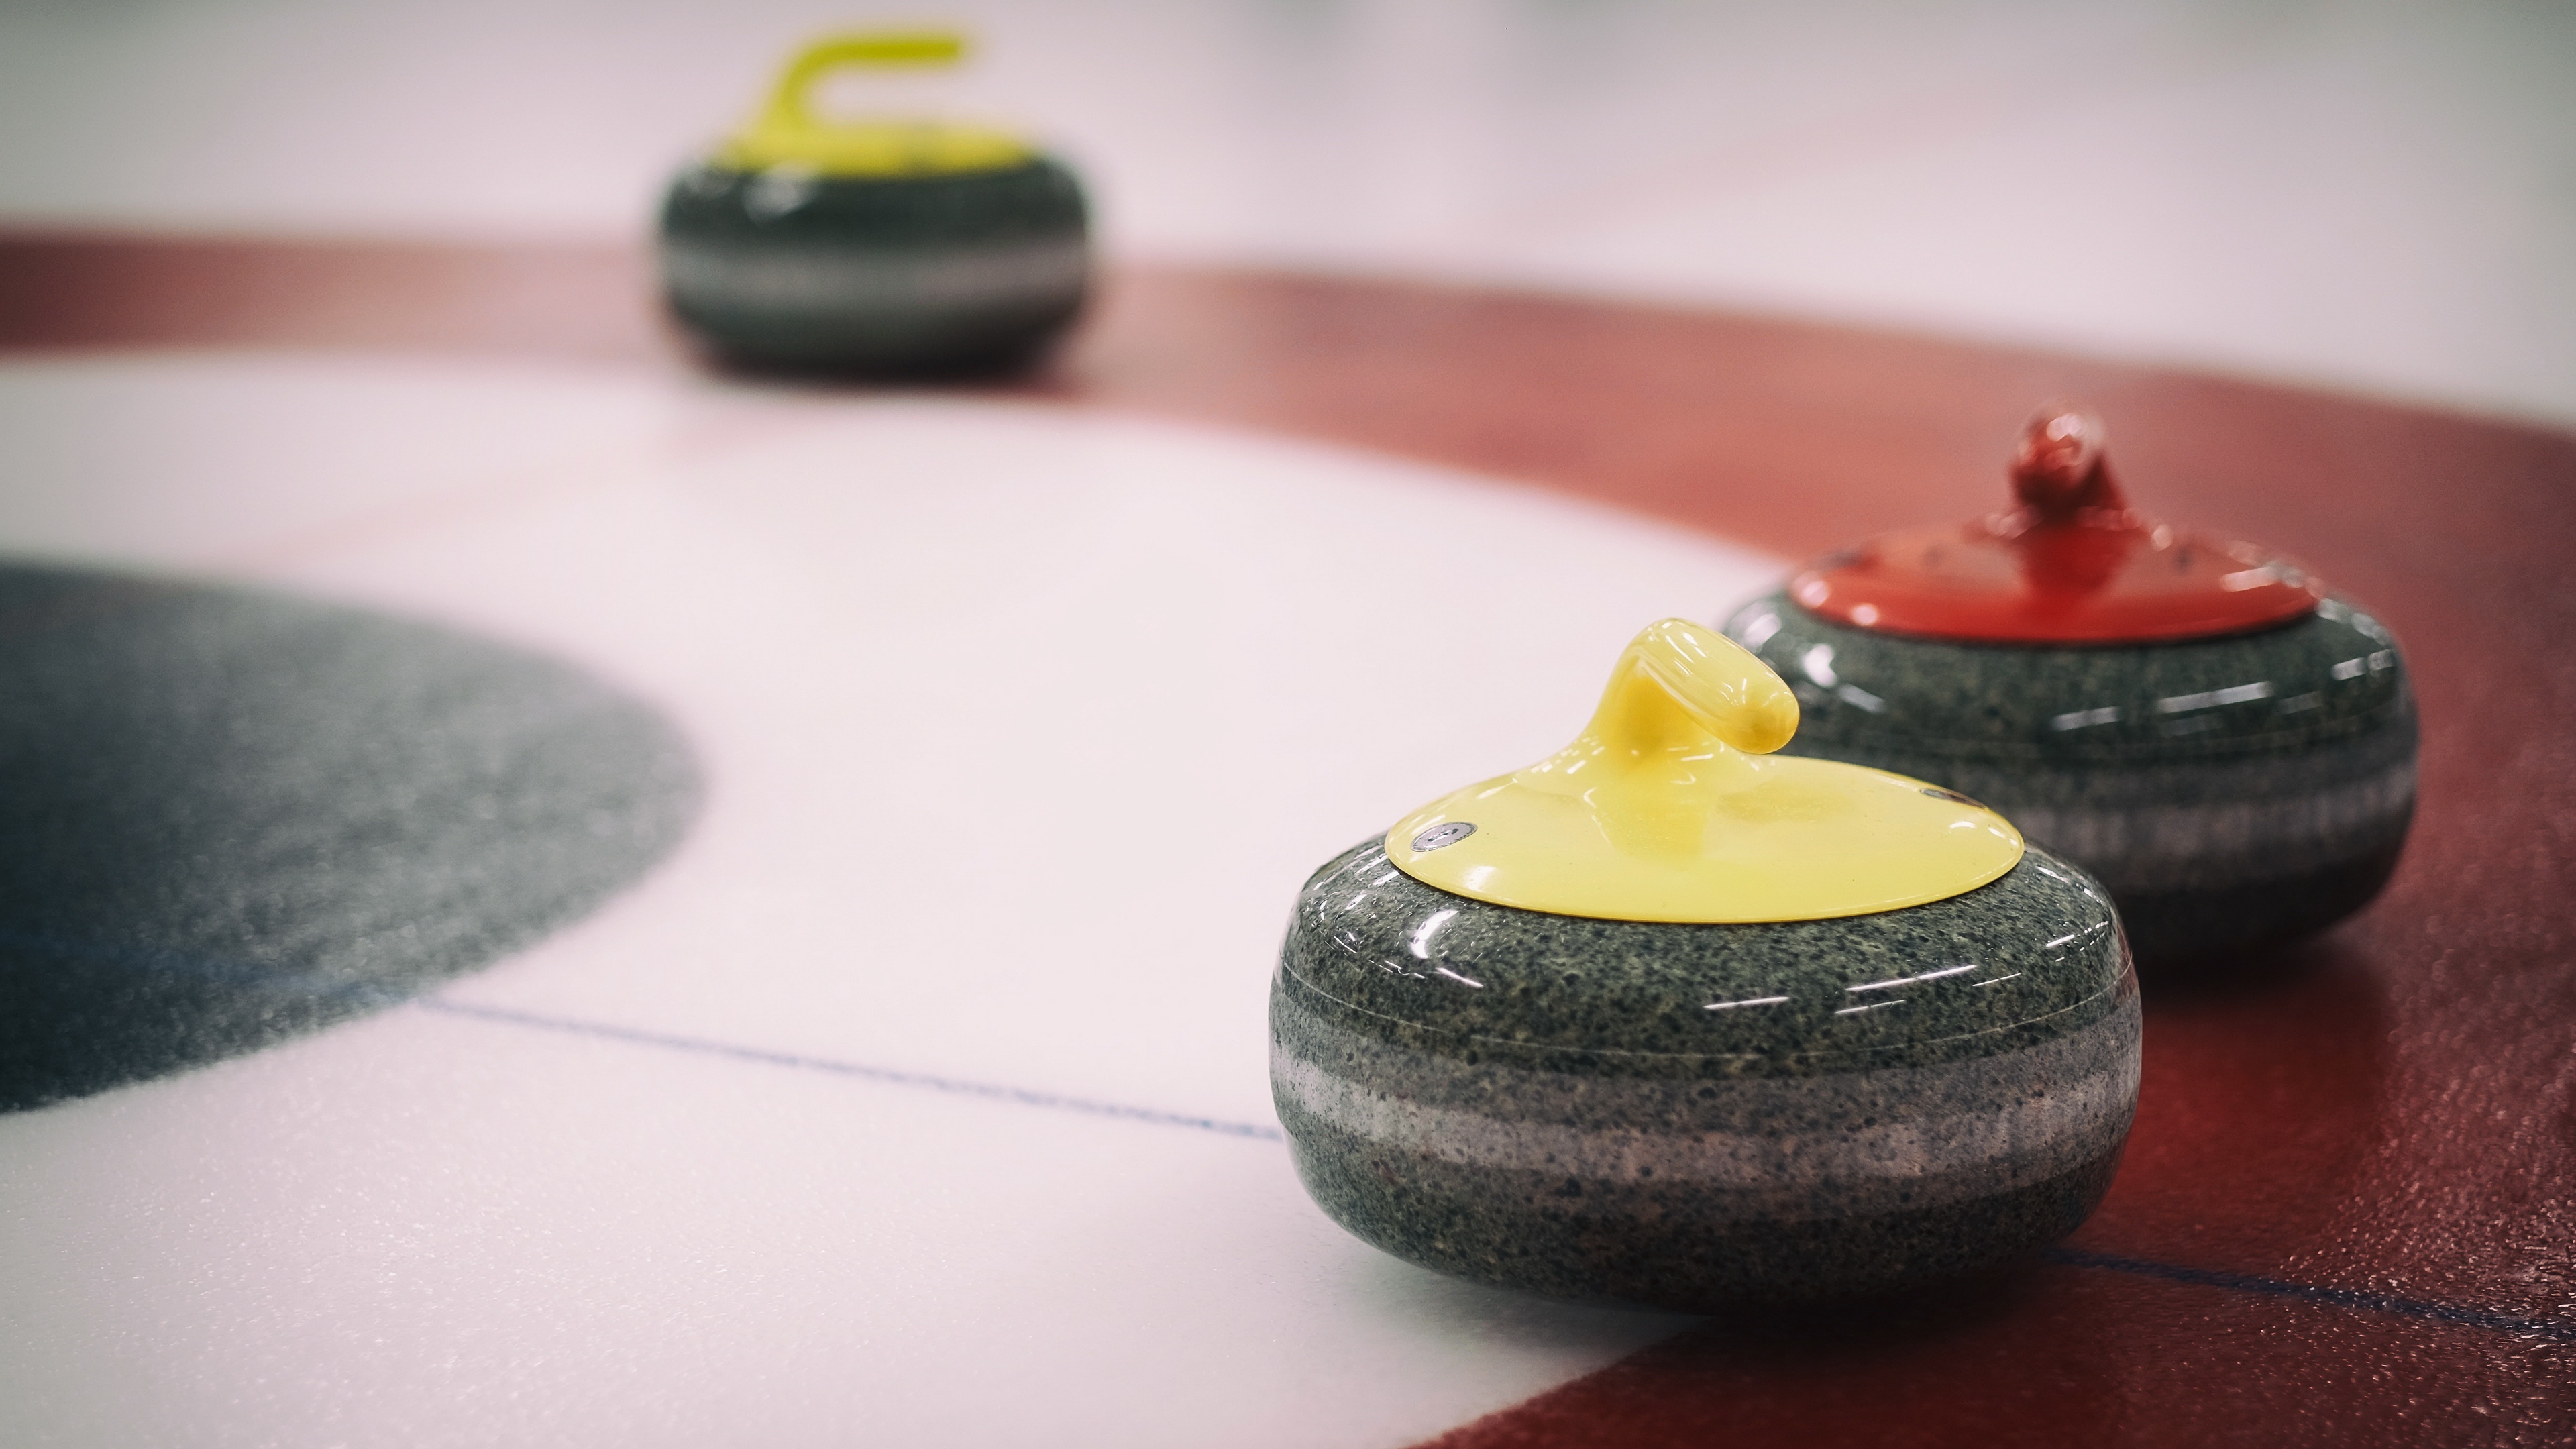 Curling: A sport in which players slide stones on a sheet of ice toward a target area. 3840x2160 4K Background.